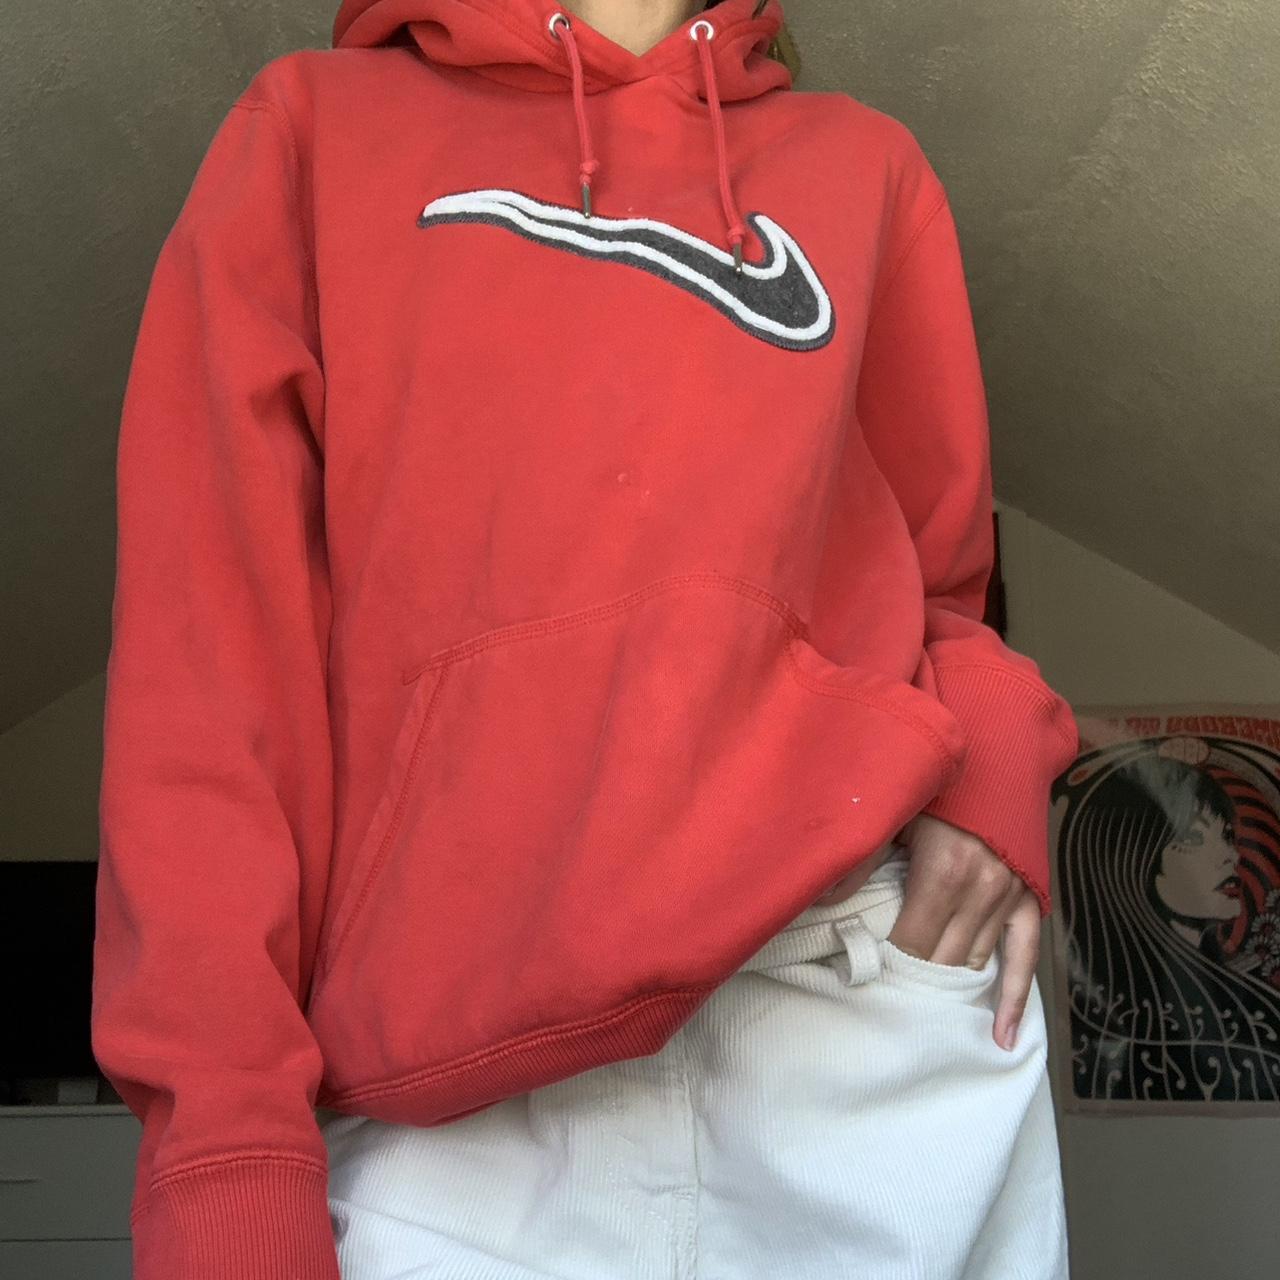 Nike Women's White and Red Hoodie